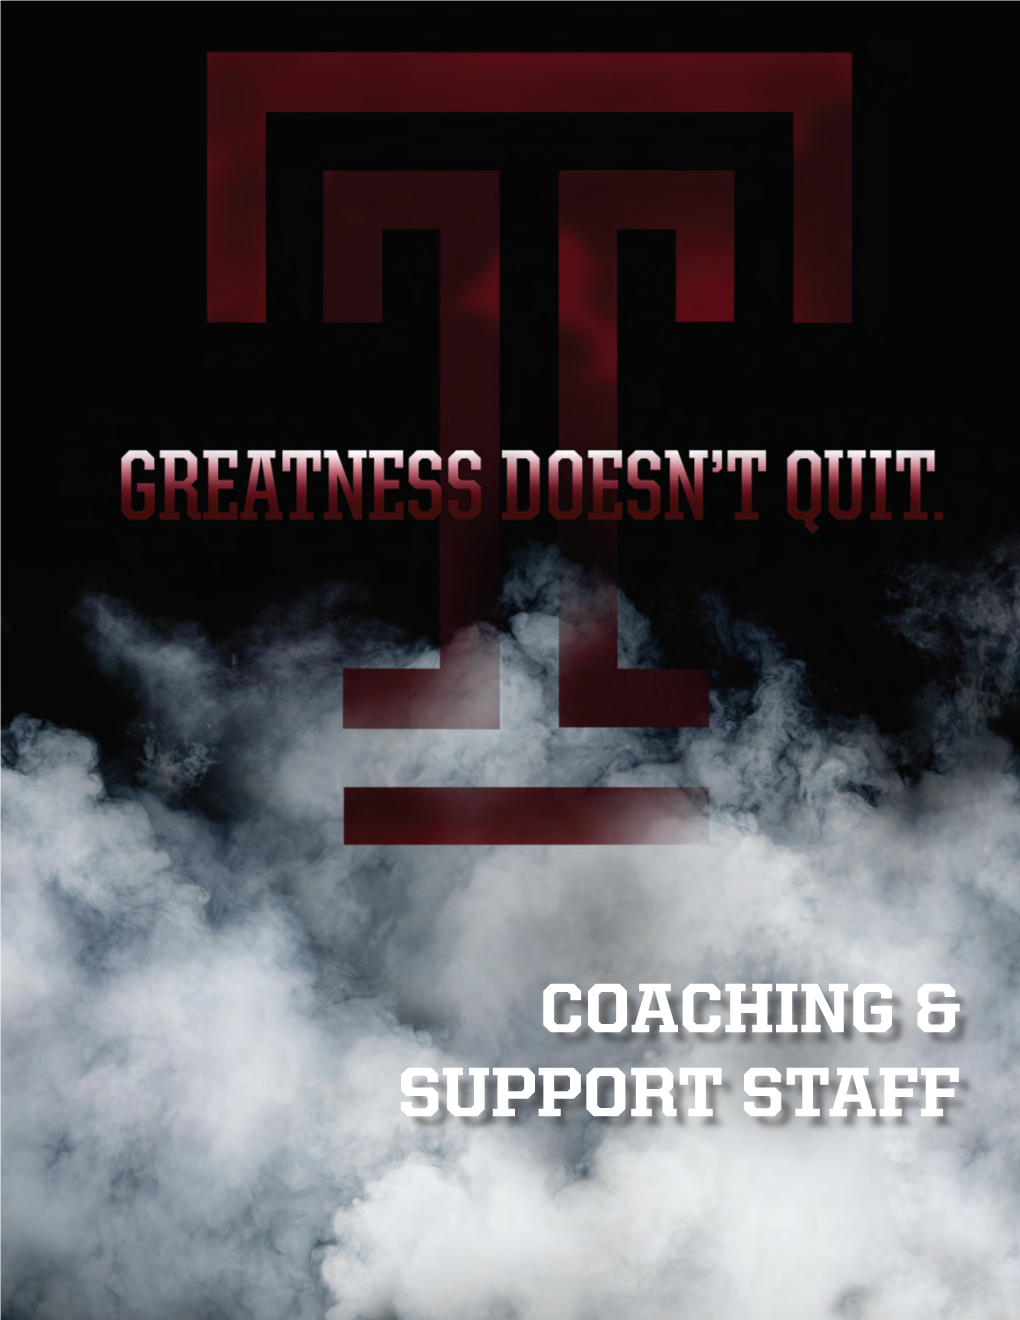 Coaching & Support Staff